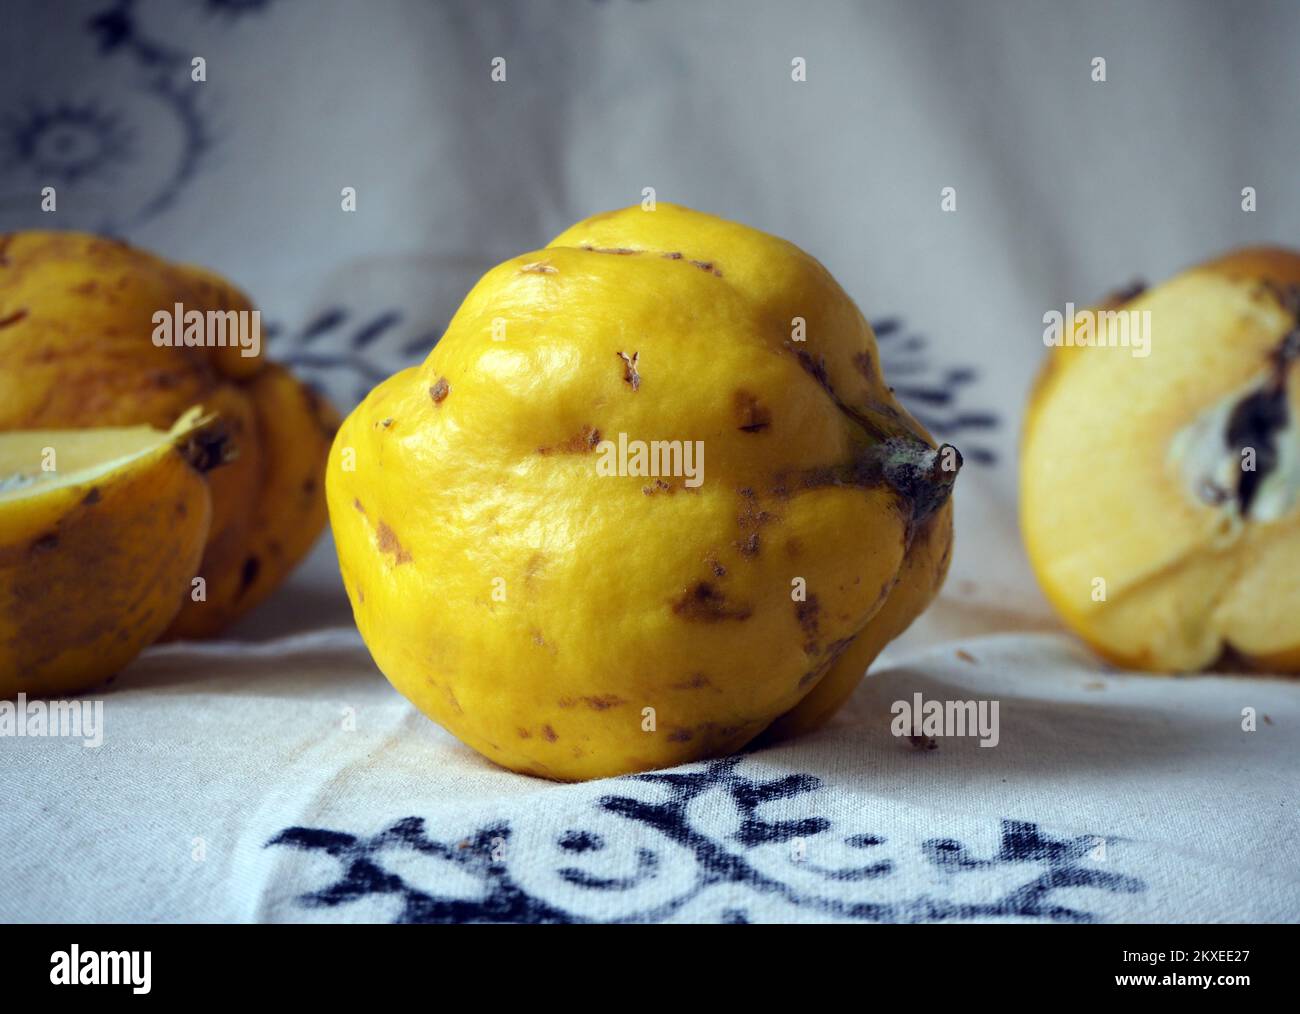 Quinces standing on a white background with black motifs. Stock Photo